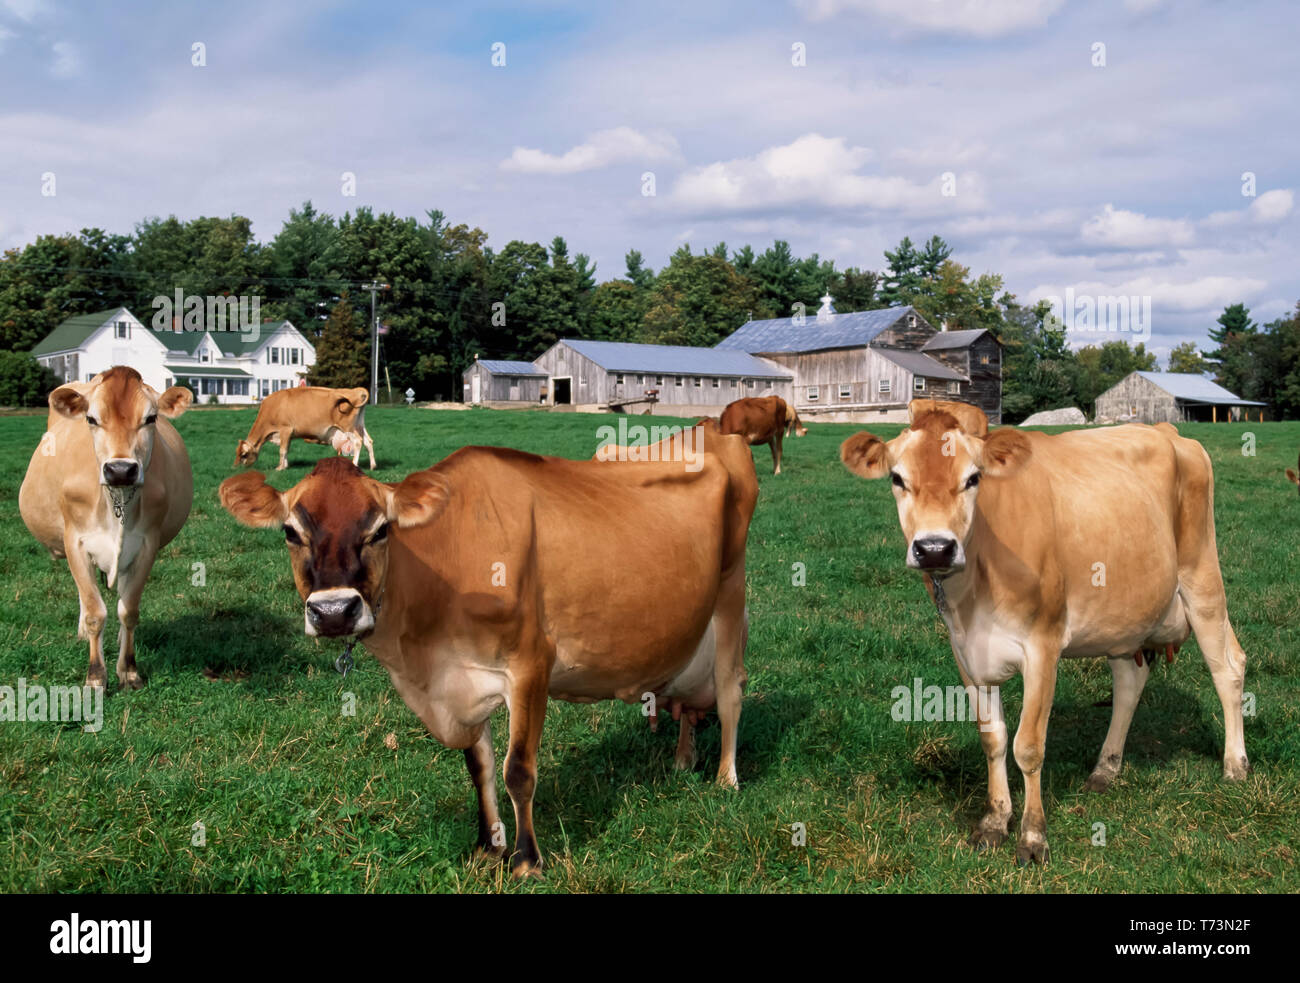 Livestock - Curious Jersey dairy cows on a green pasture with farmstead  buildings in the background / Maine, USA Stock Photo - Alamy